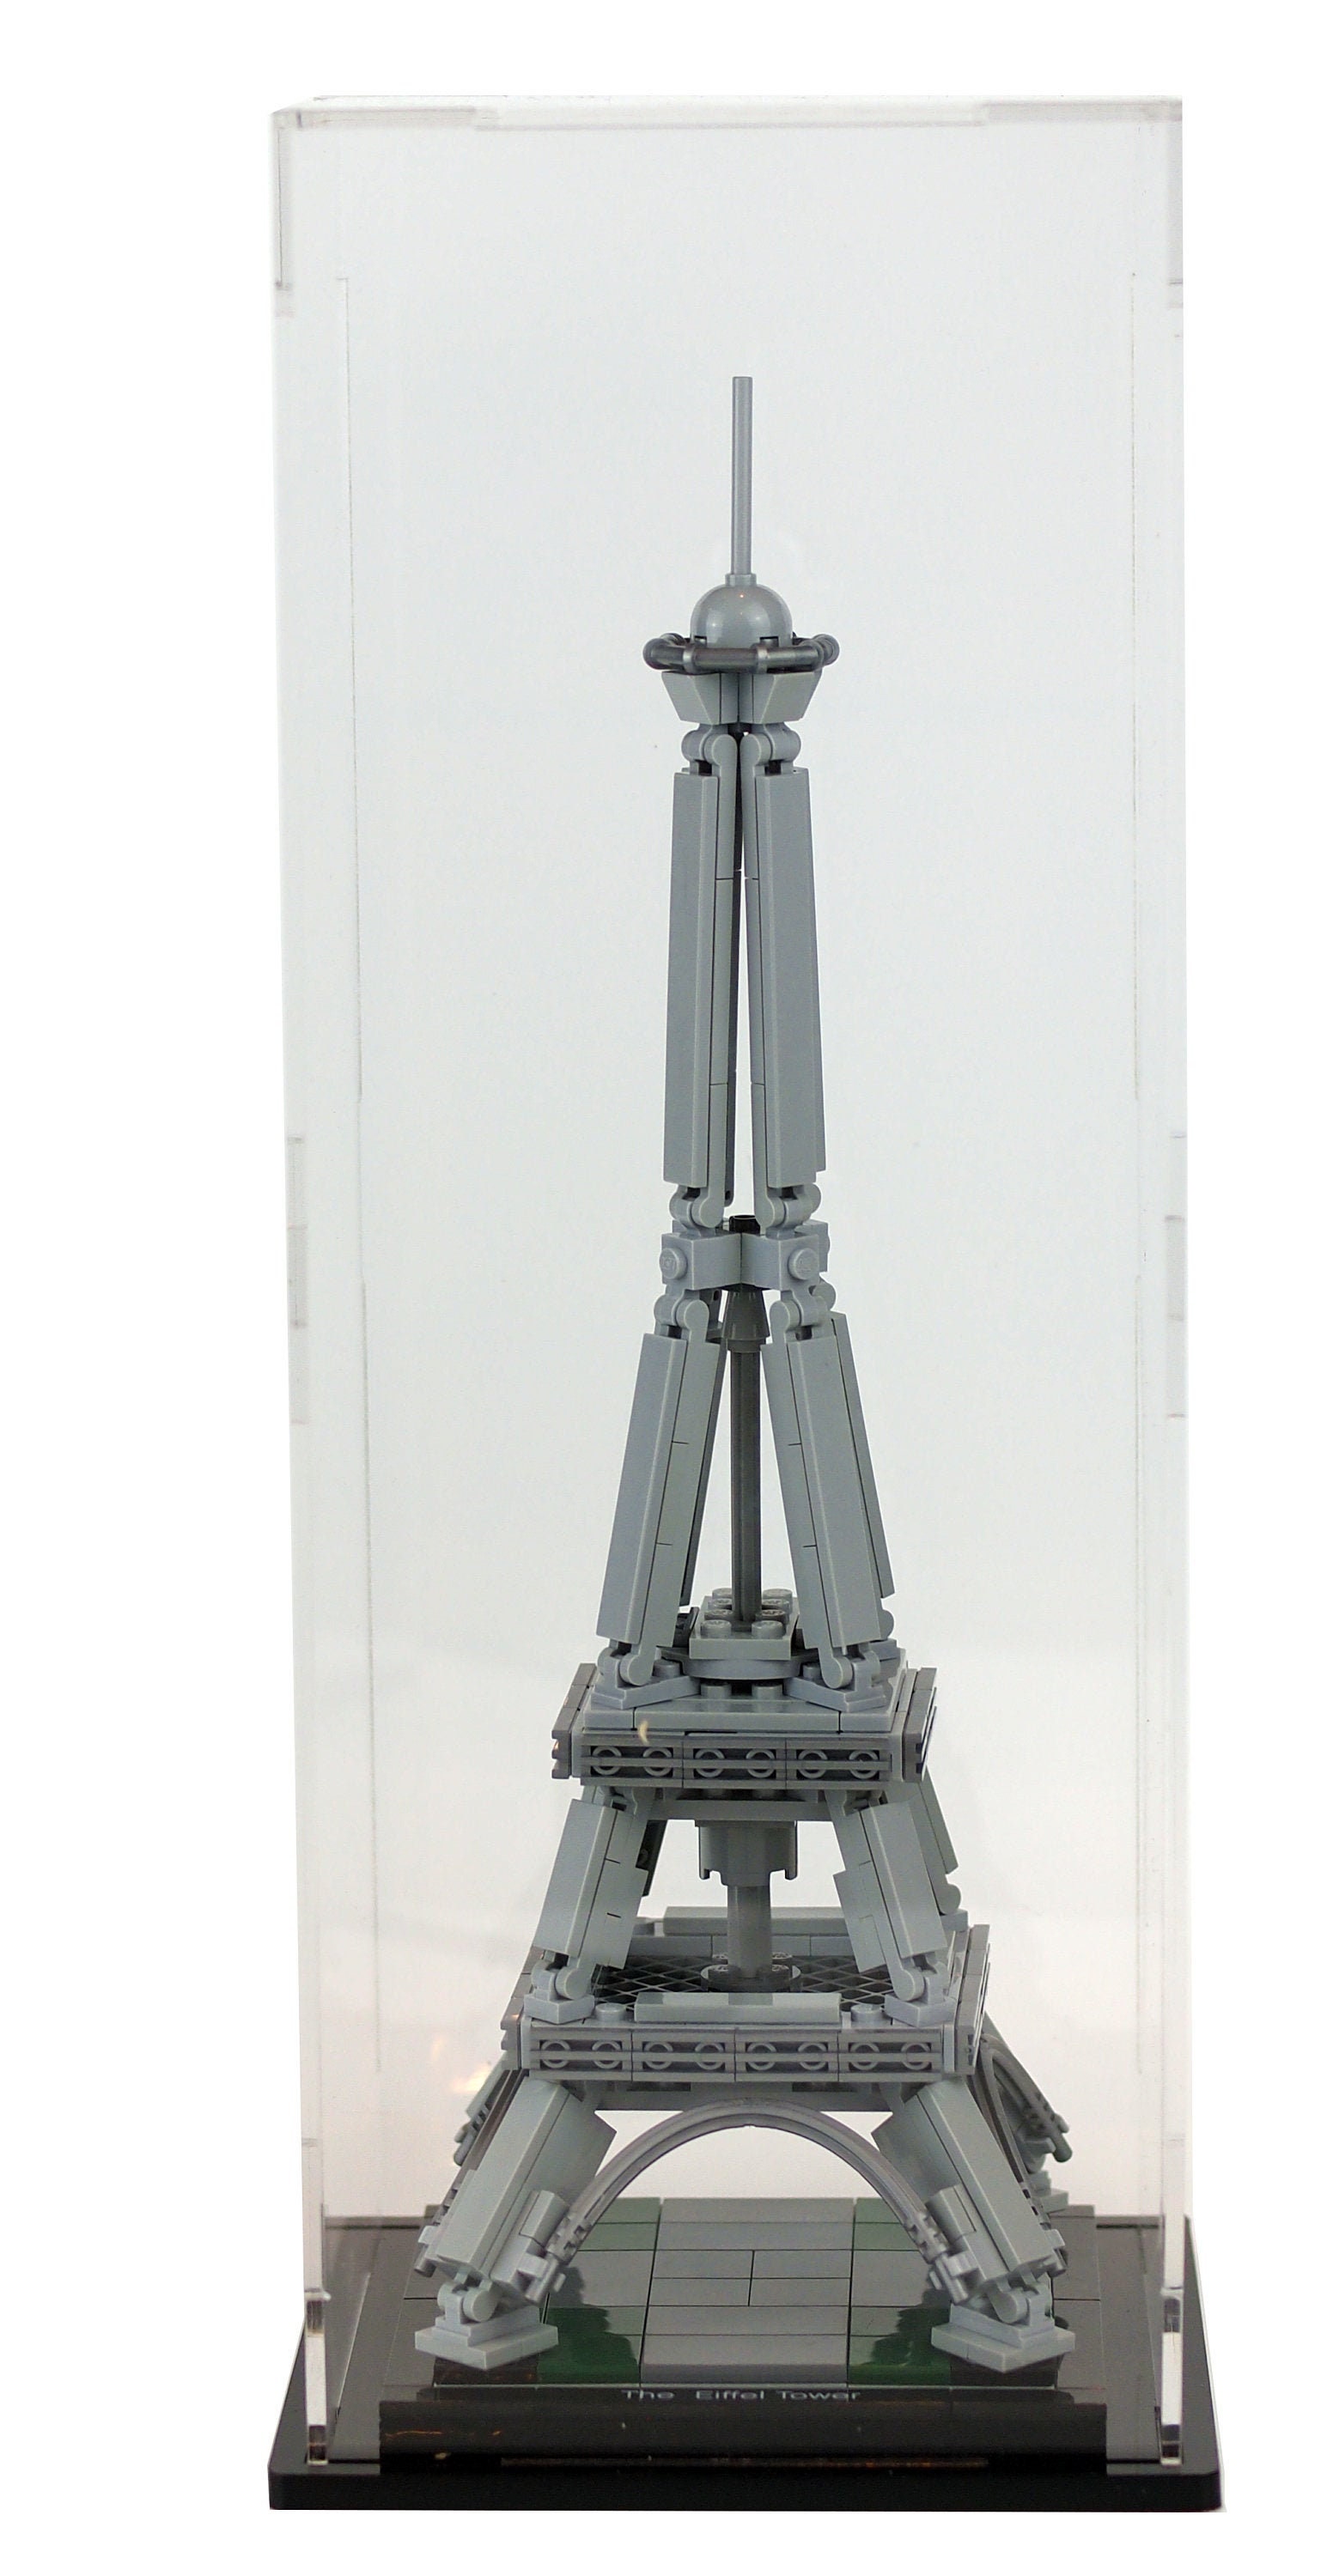 LEGO Architecture 21019 The Eiffel Tower MANUAL ONLY